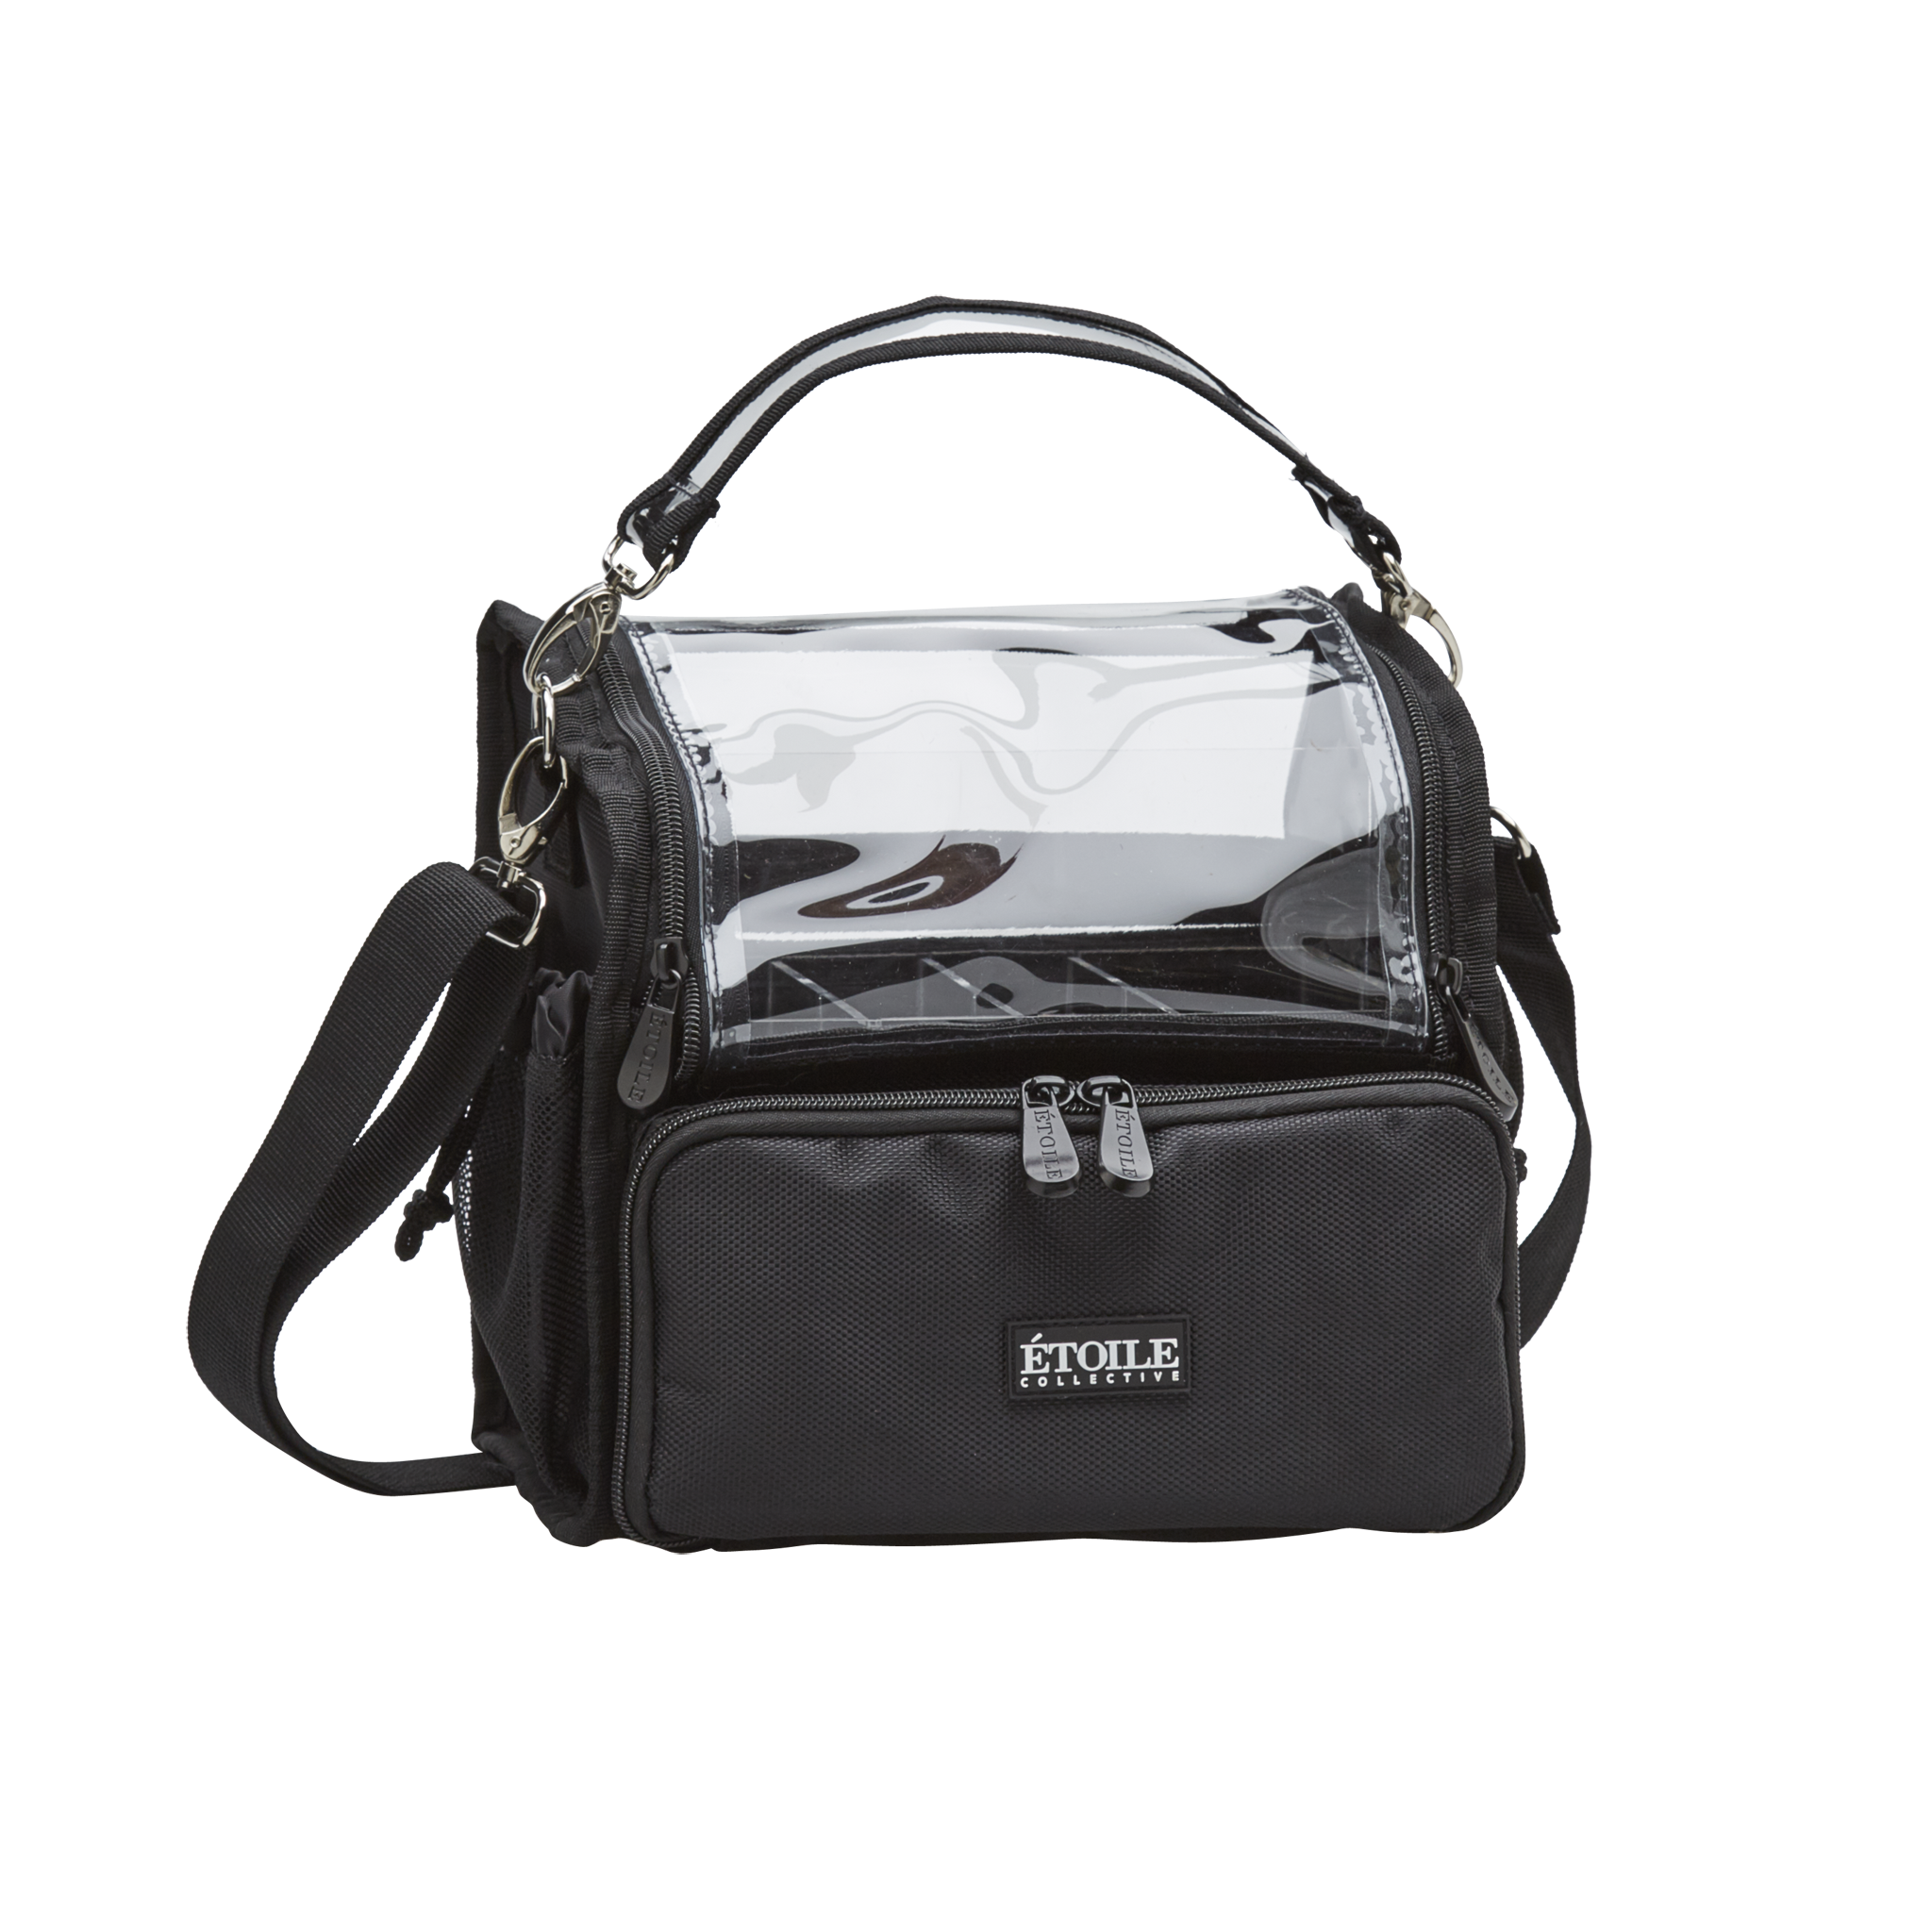 Etoile Collective Large Cosmetic Travel Case: Black Leather